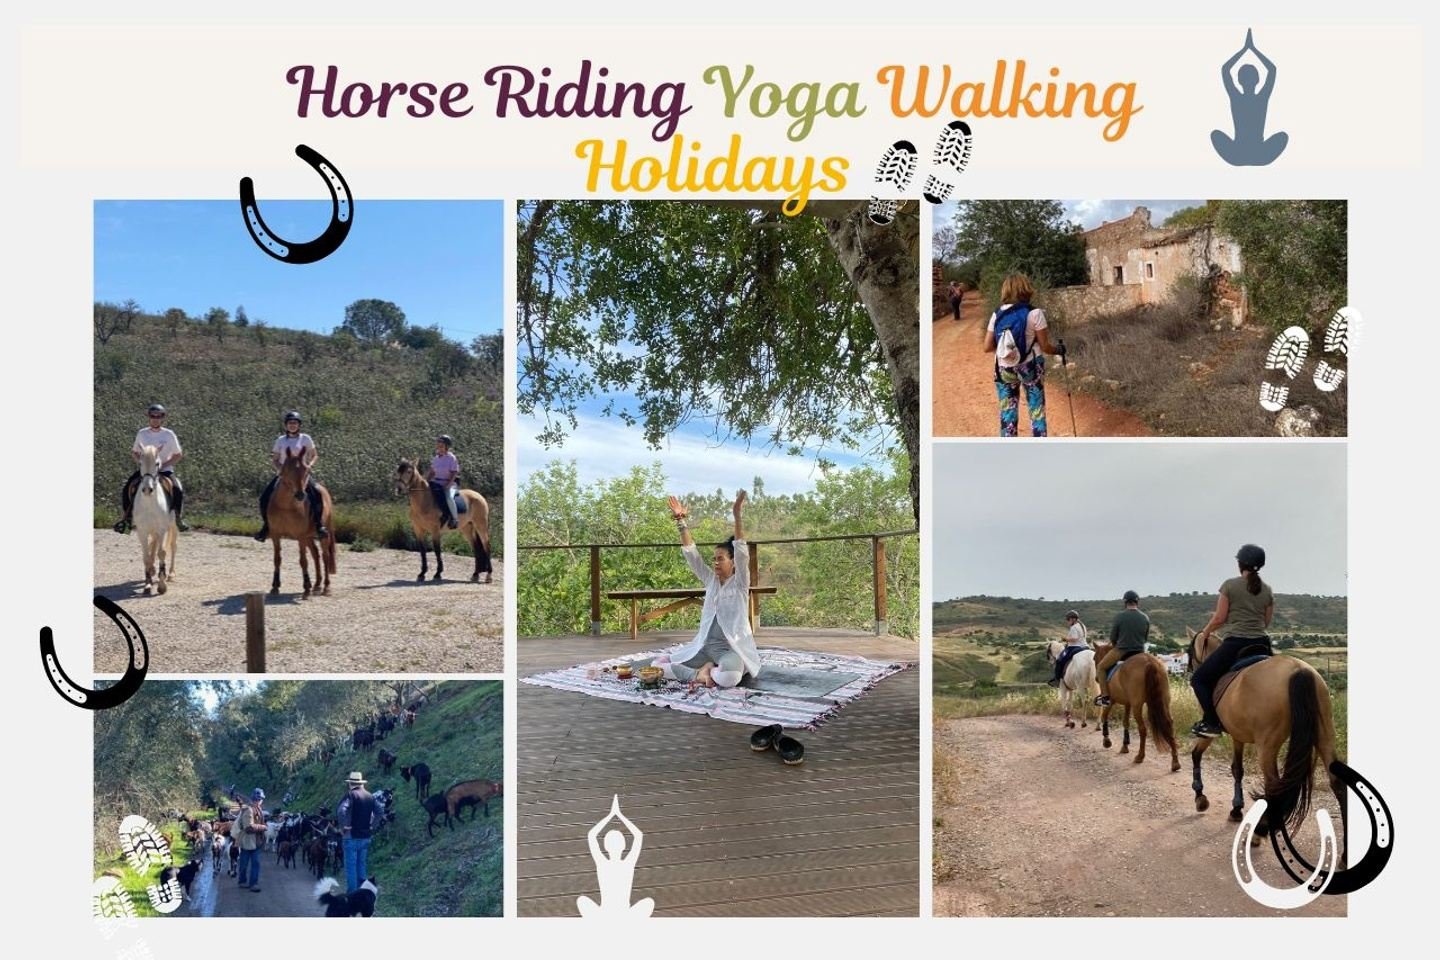 Algarve Horse Riding, Hiking and Yoga holiday at Figs on the Funcho